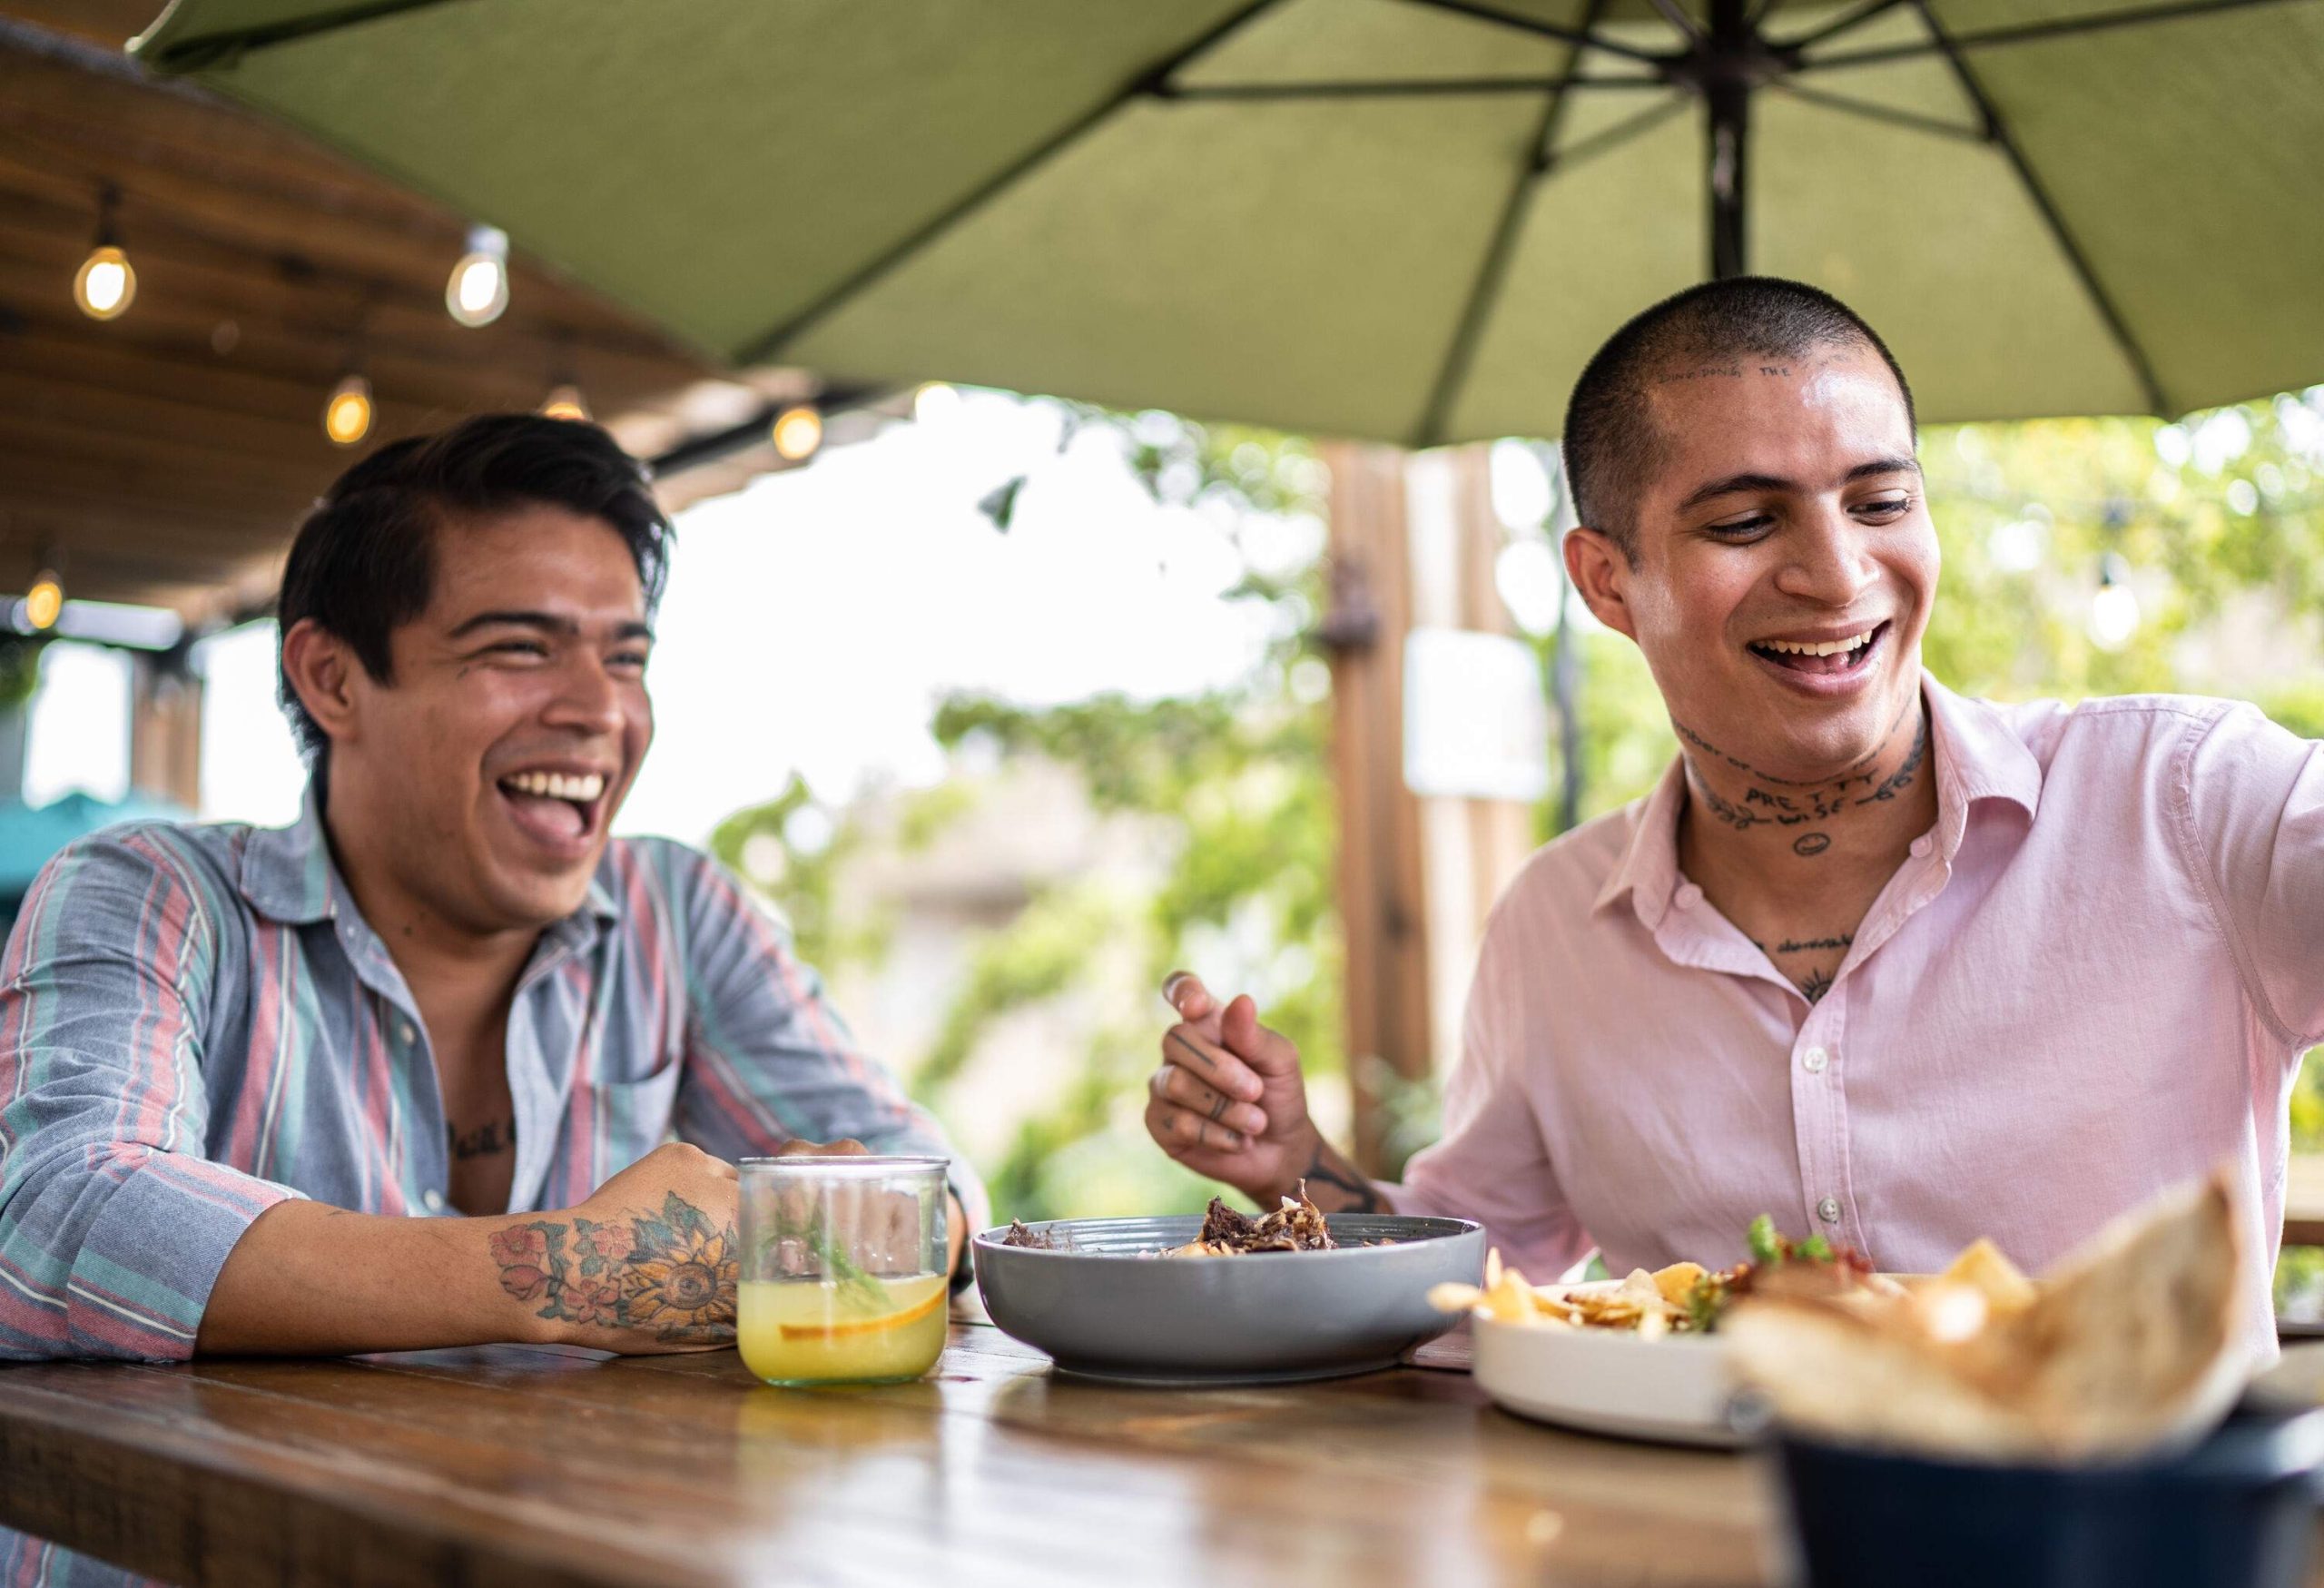 Male lovers laughing at something while sitting at a table with food and beverages.